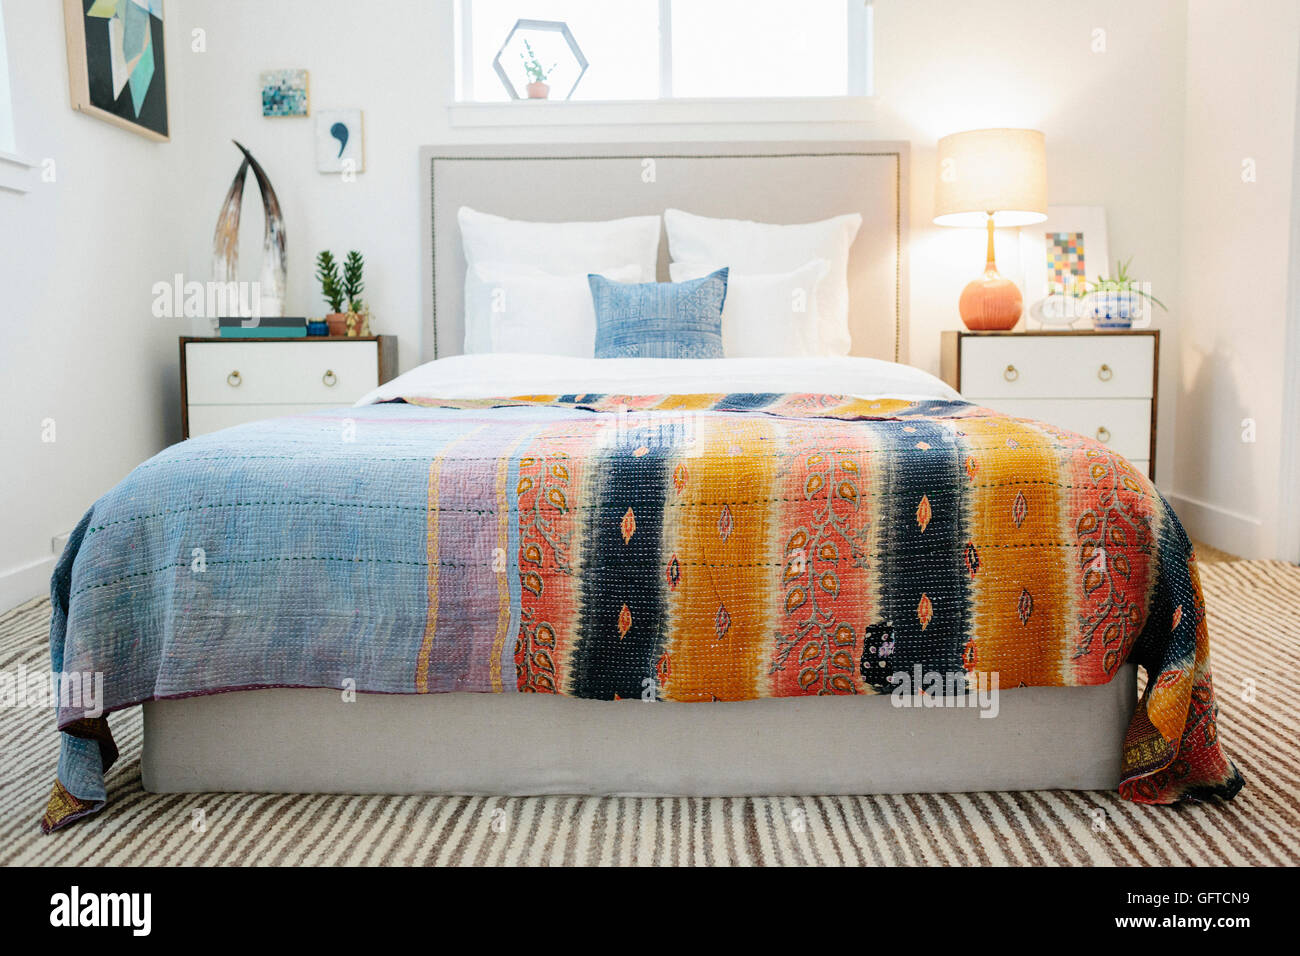 A bedroom in an apartment with a double bed and beside cabinets and a vivid striped patterned bedspread Stock Photo